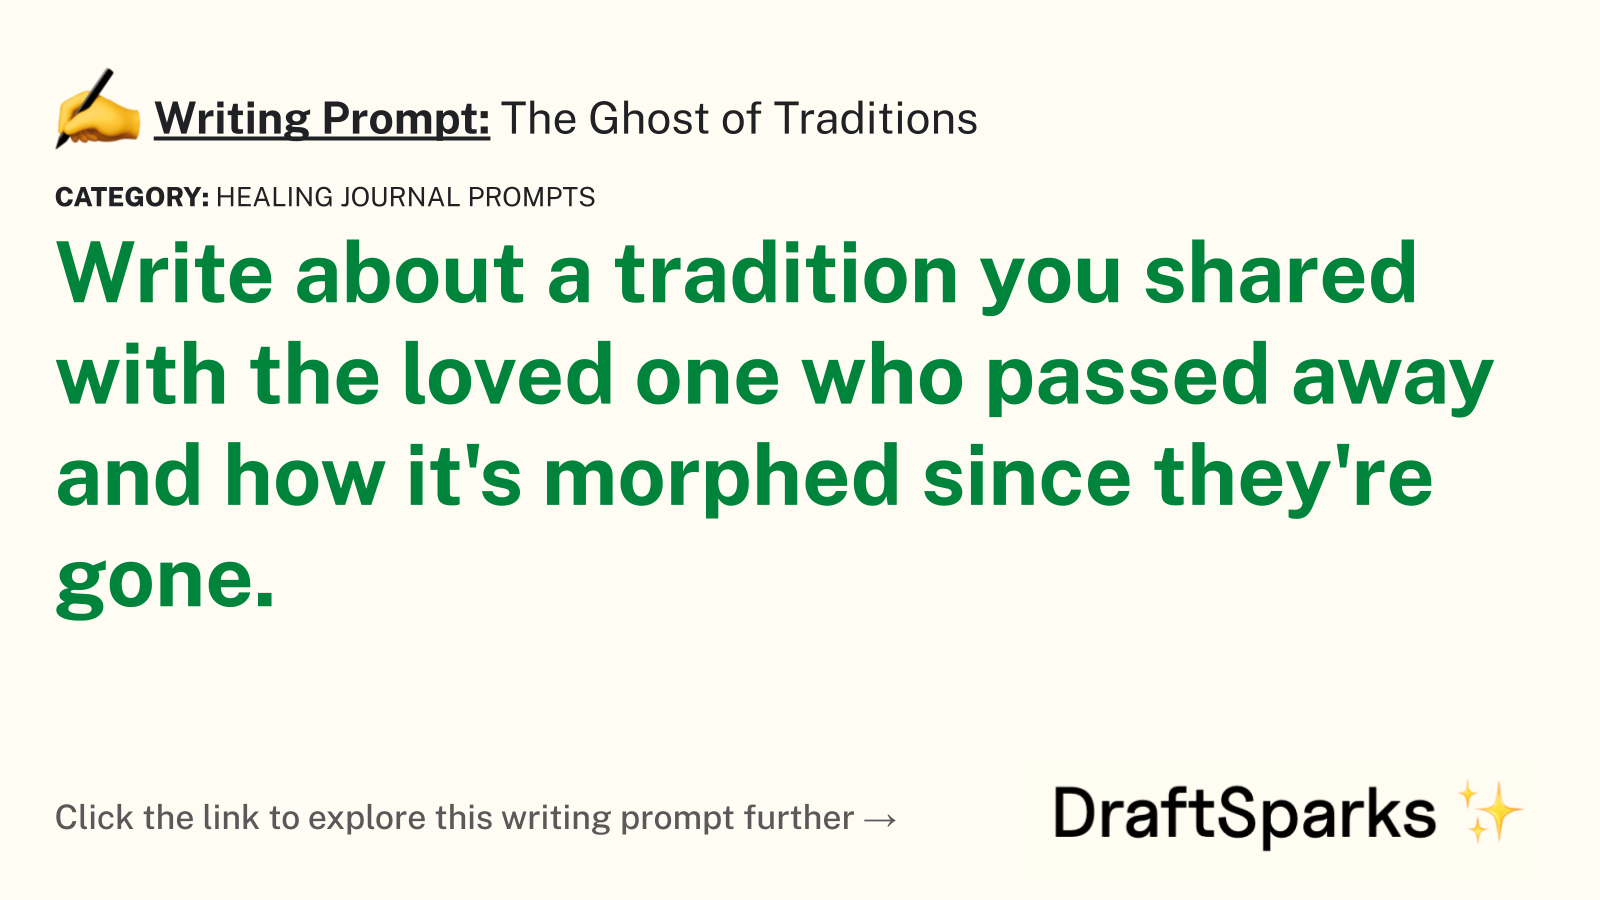 The Ghost of Traditions